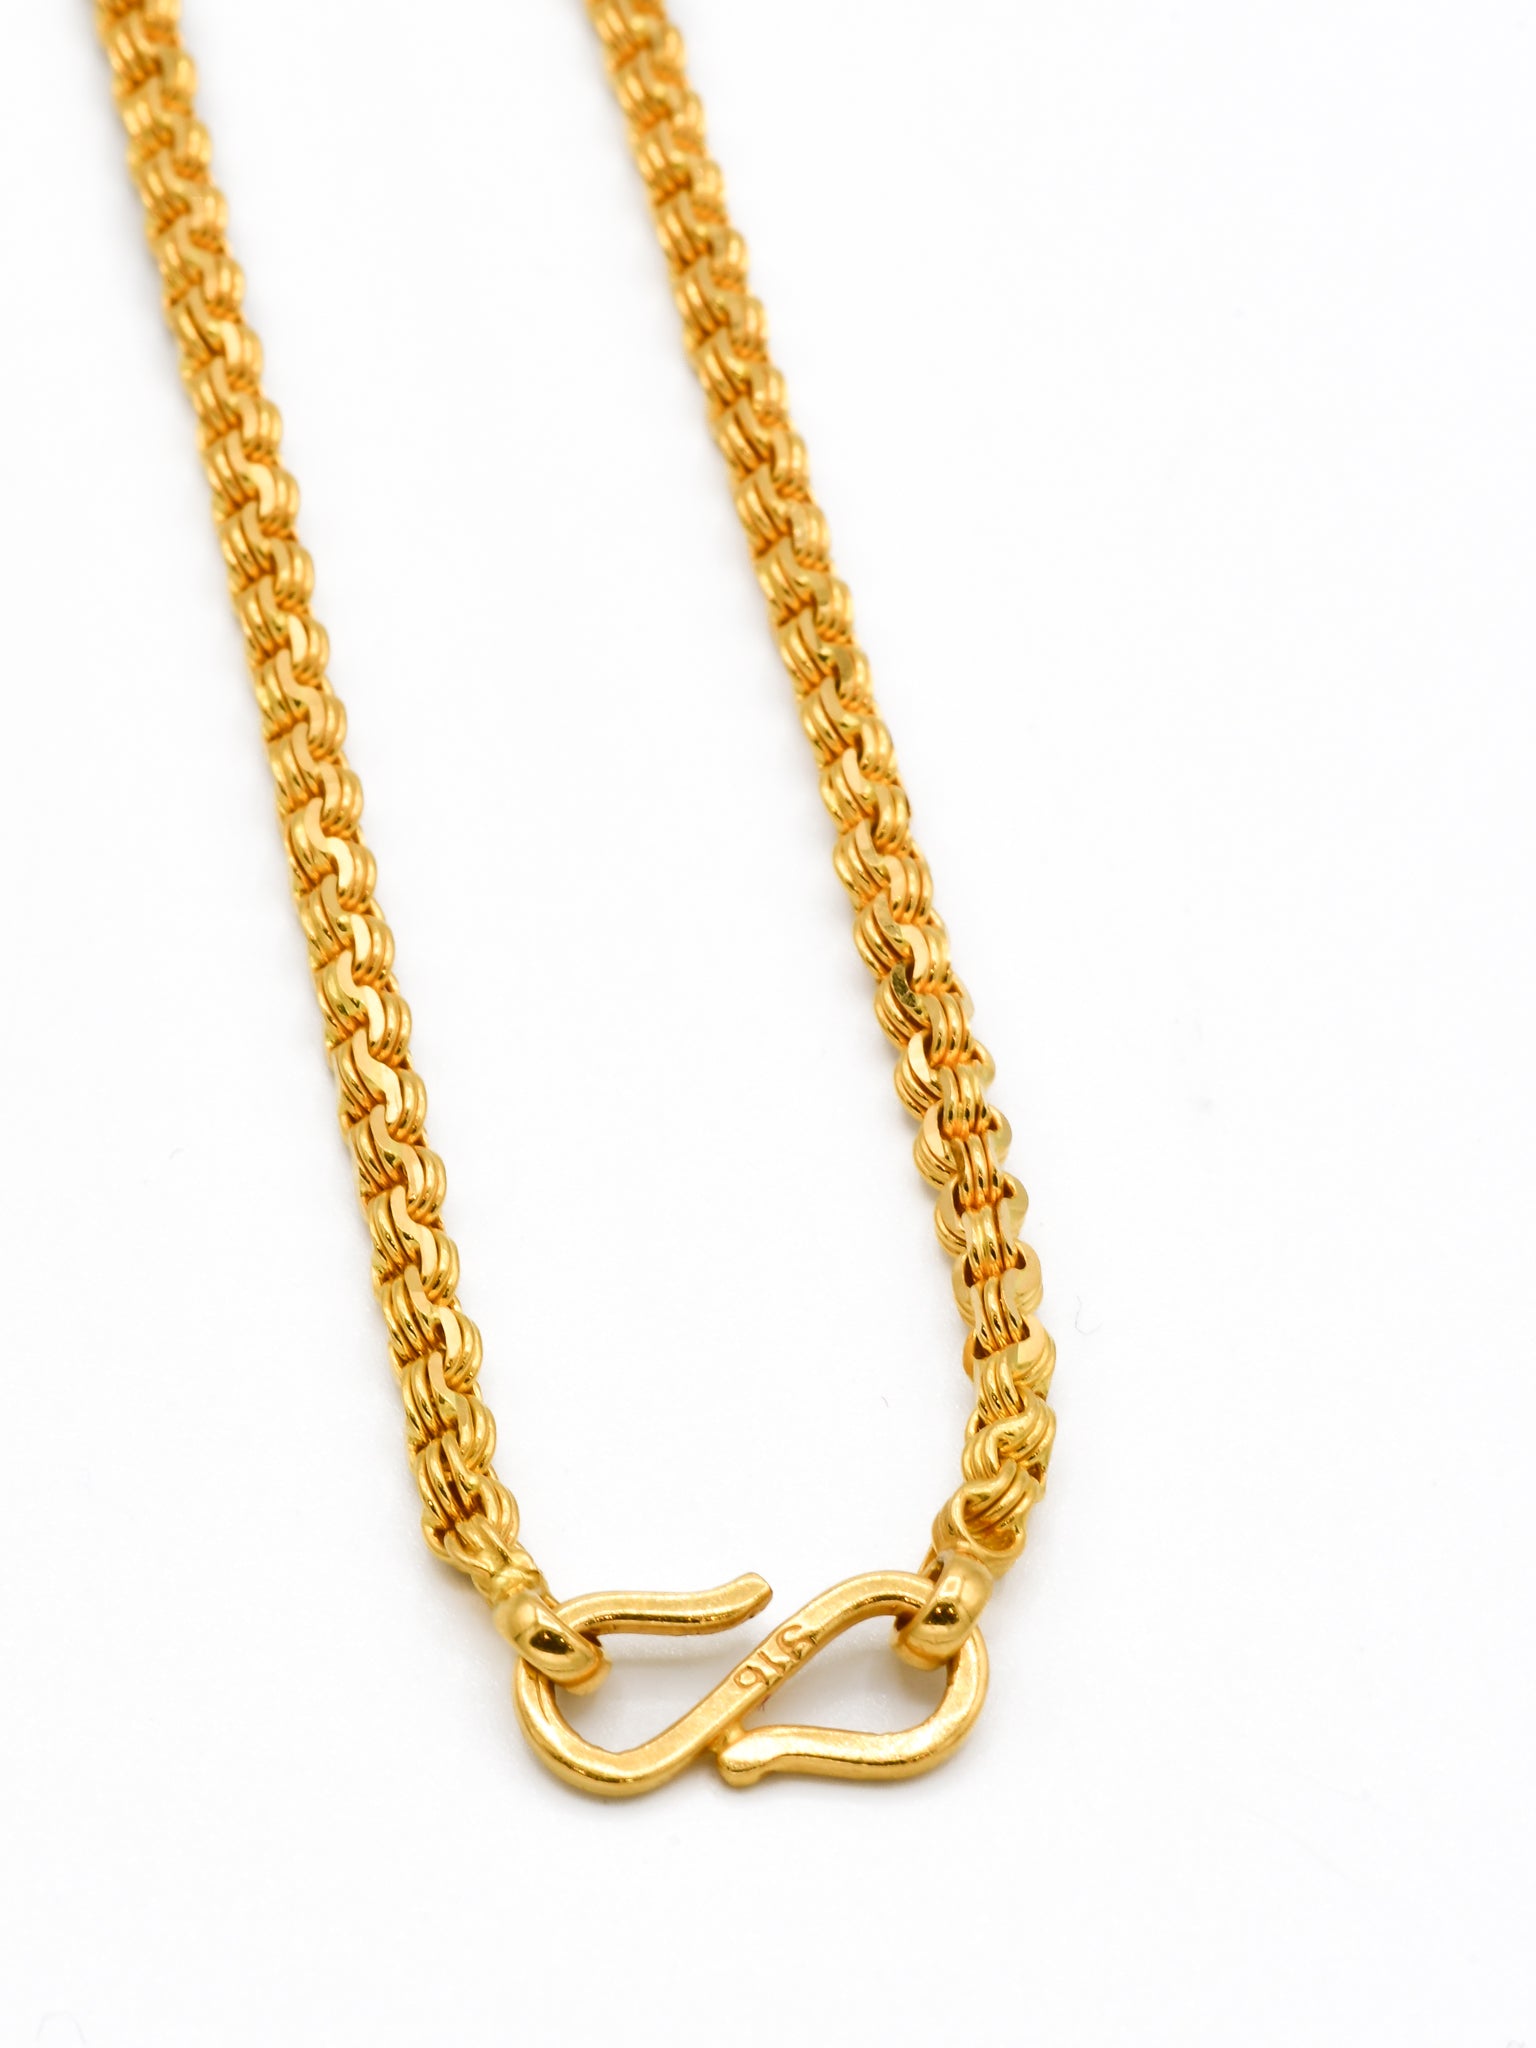 22ct Gold Chain - 55 cm - Roop Darshan